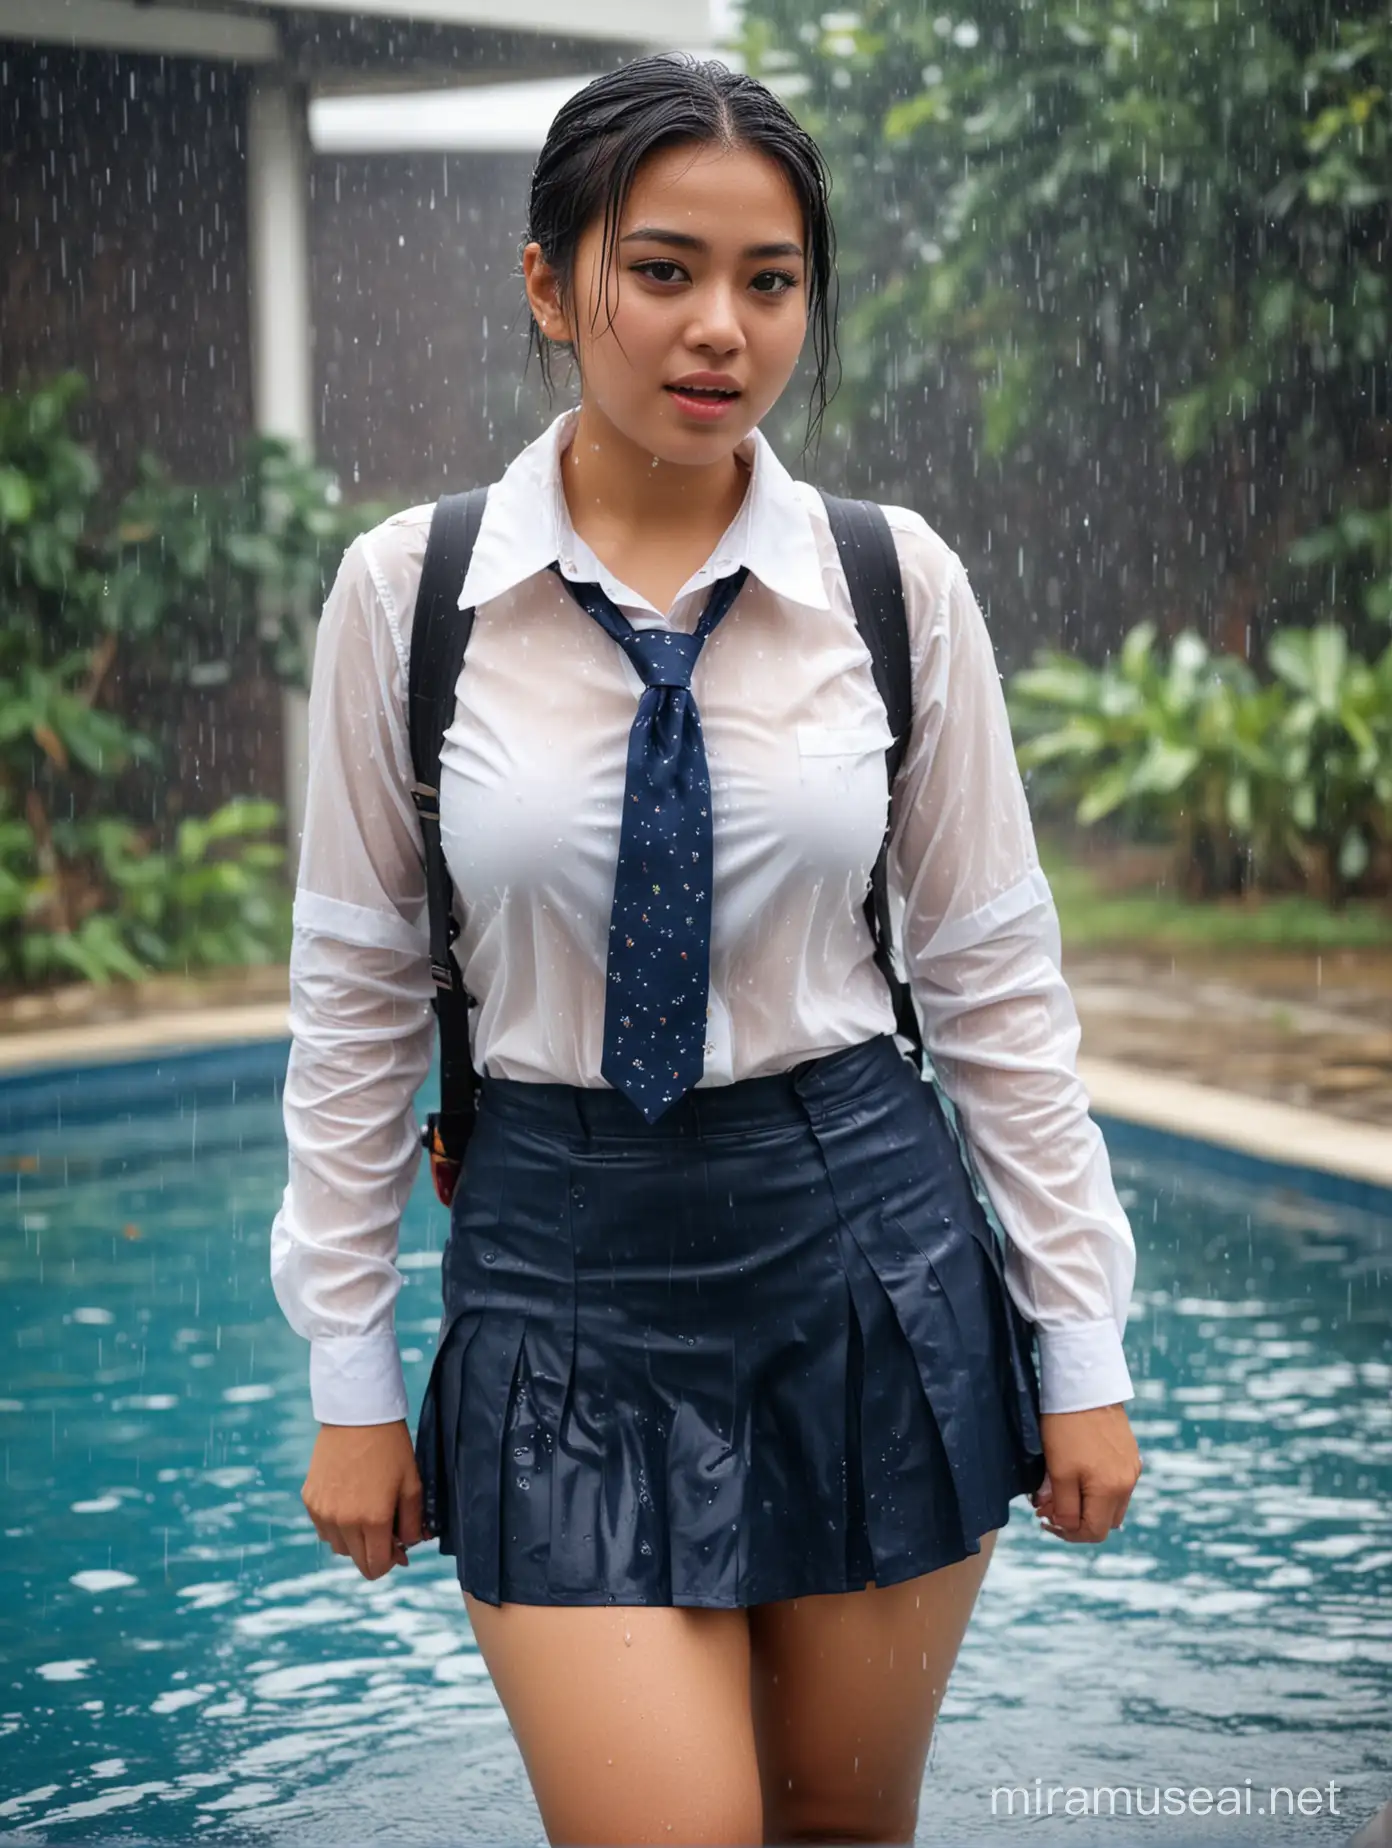 20 years old woman - malaysian, chubby, fat, makeup, tight long sleeves buttoned white sheer shirt tucked into dark blue tight fit skirt - soaking diaphanous wet, necktie, wearing a backpack, out from swimming pool, heavy downpour rain, wet face, wet clothes, wet body, slicked back wet hair, goofy expression